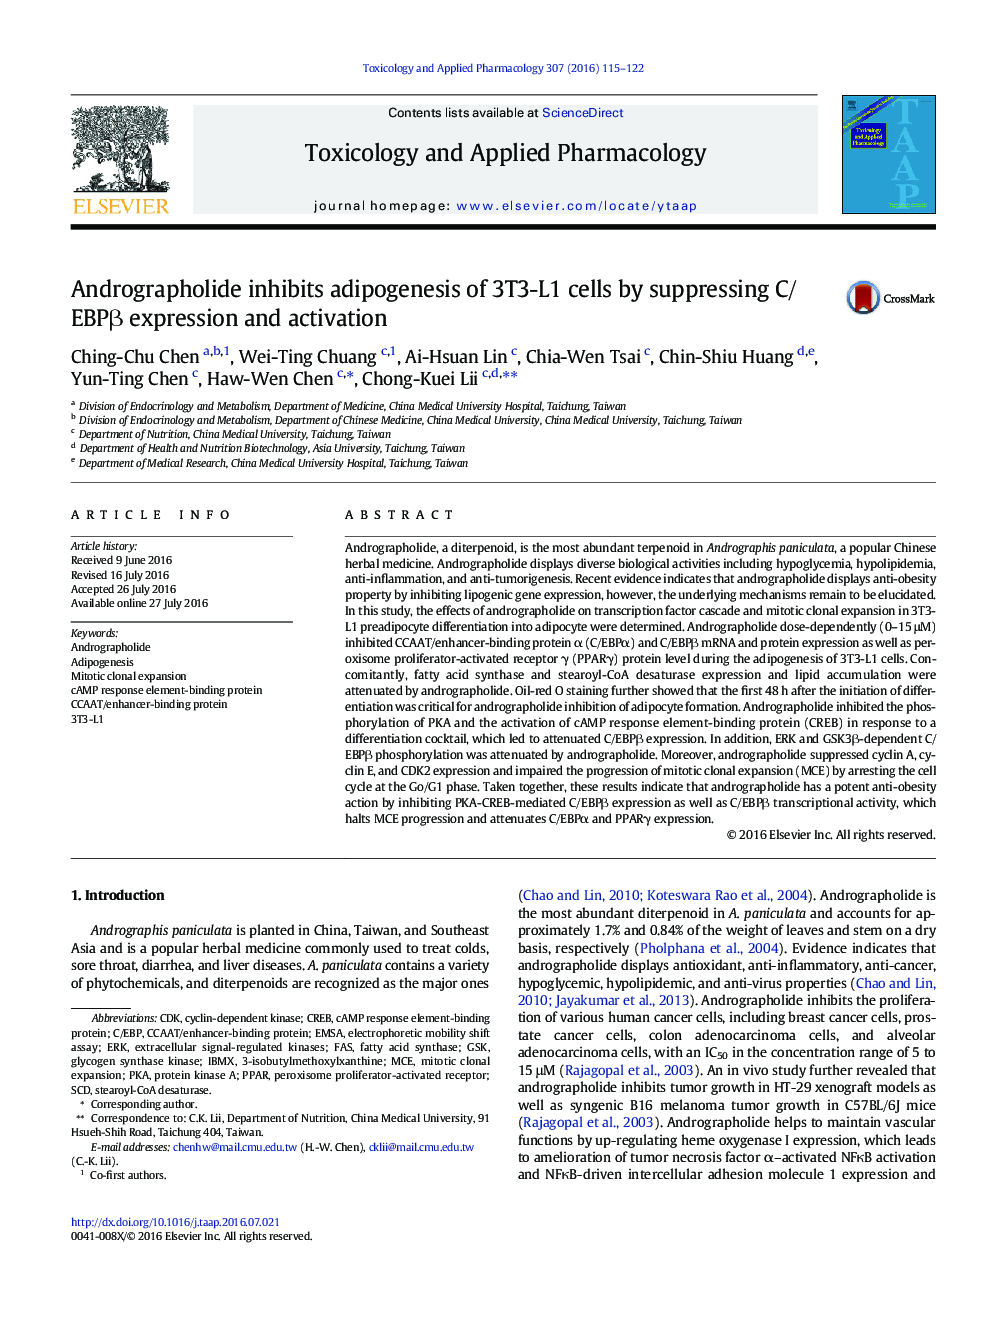 Andrographolide inhibits adipogenesis of 3T3-L1 cells by suppressing C/EBPβ expression and activation